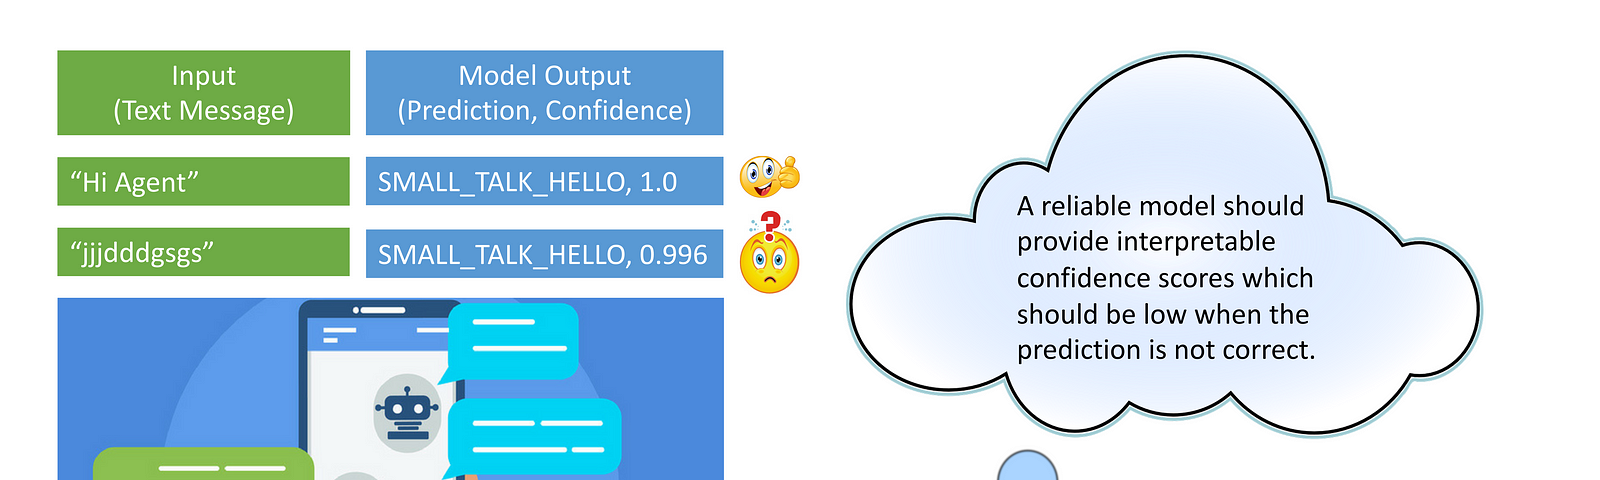 Schematic input and output from an imagined conversation (HI agent) with a virtual agent, with low confidence